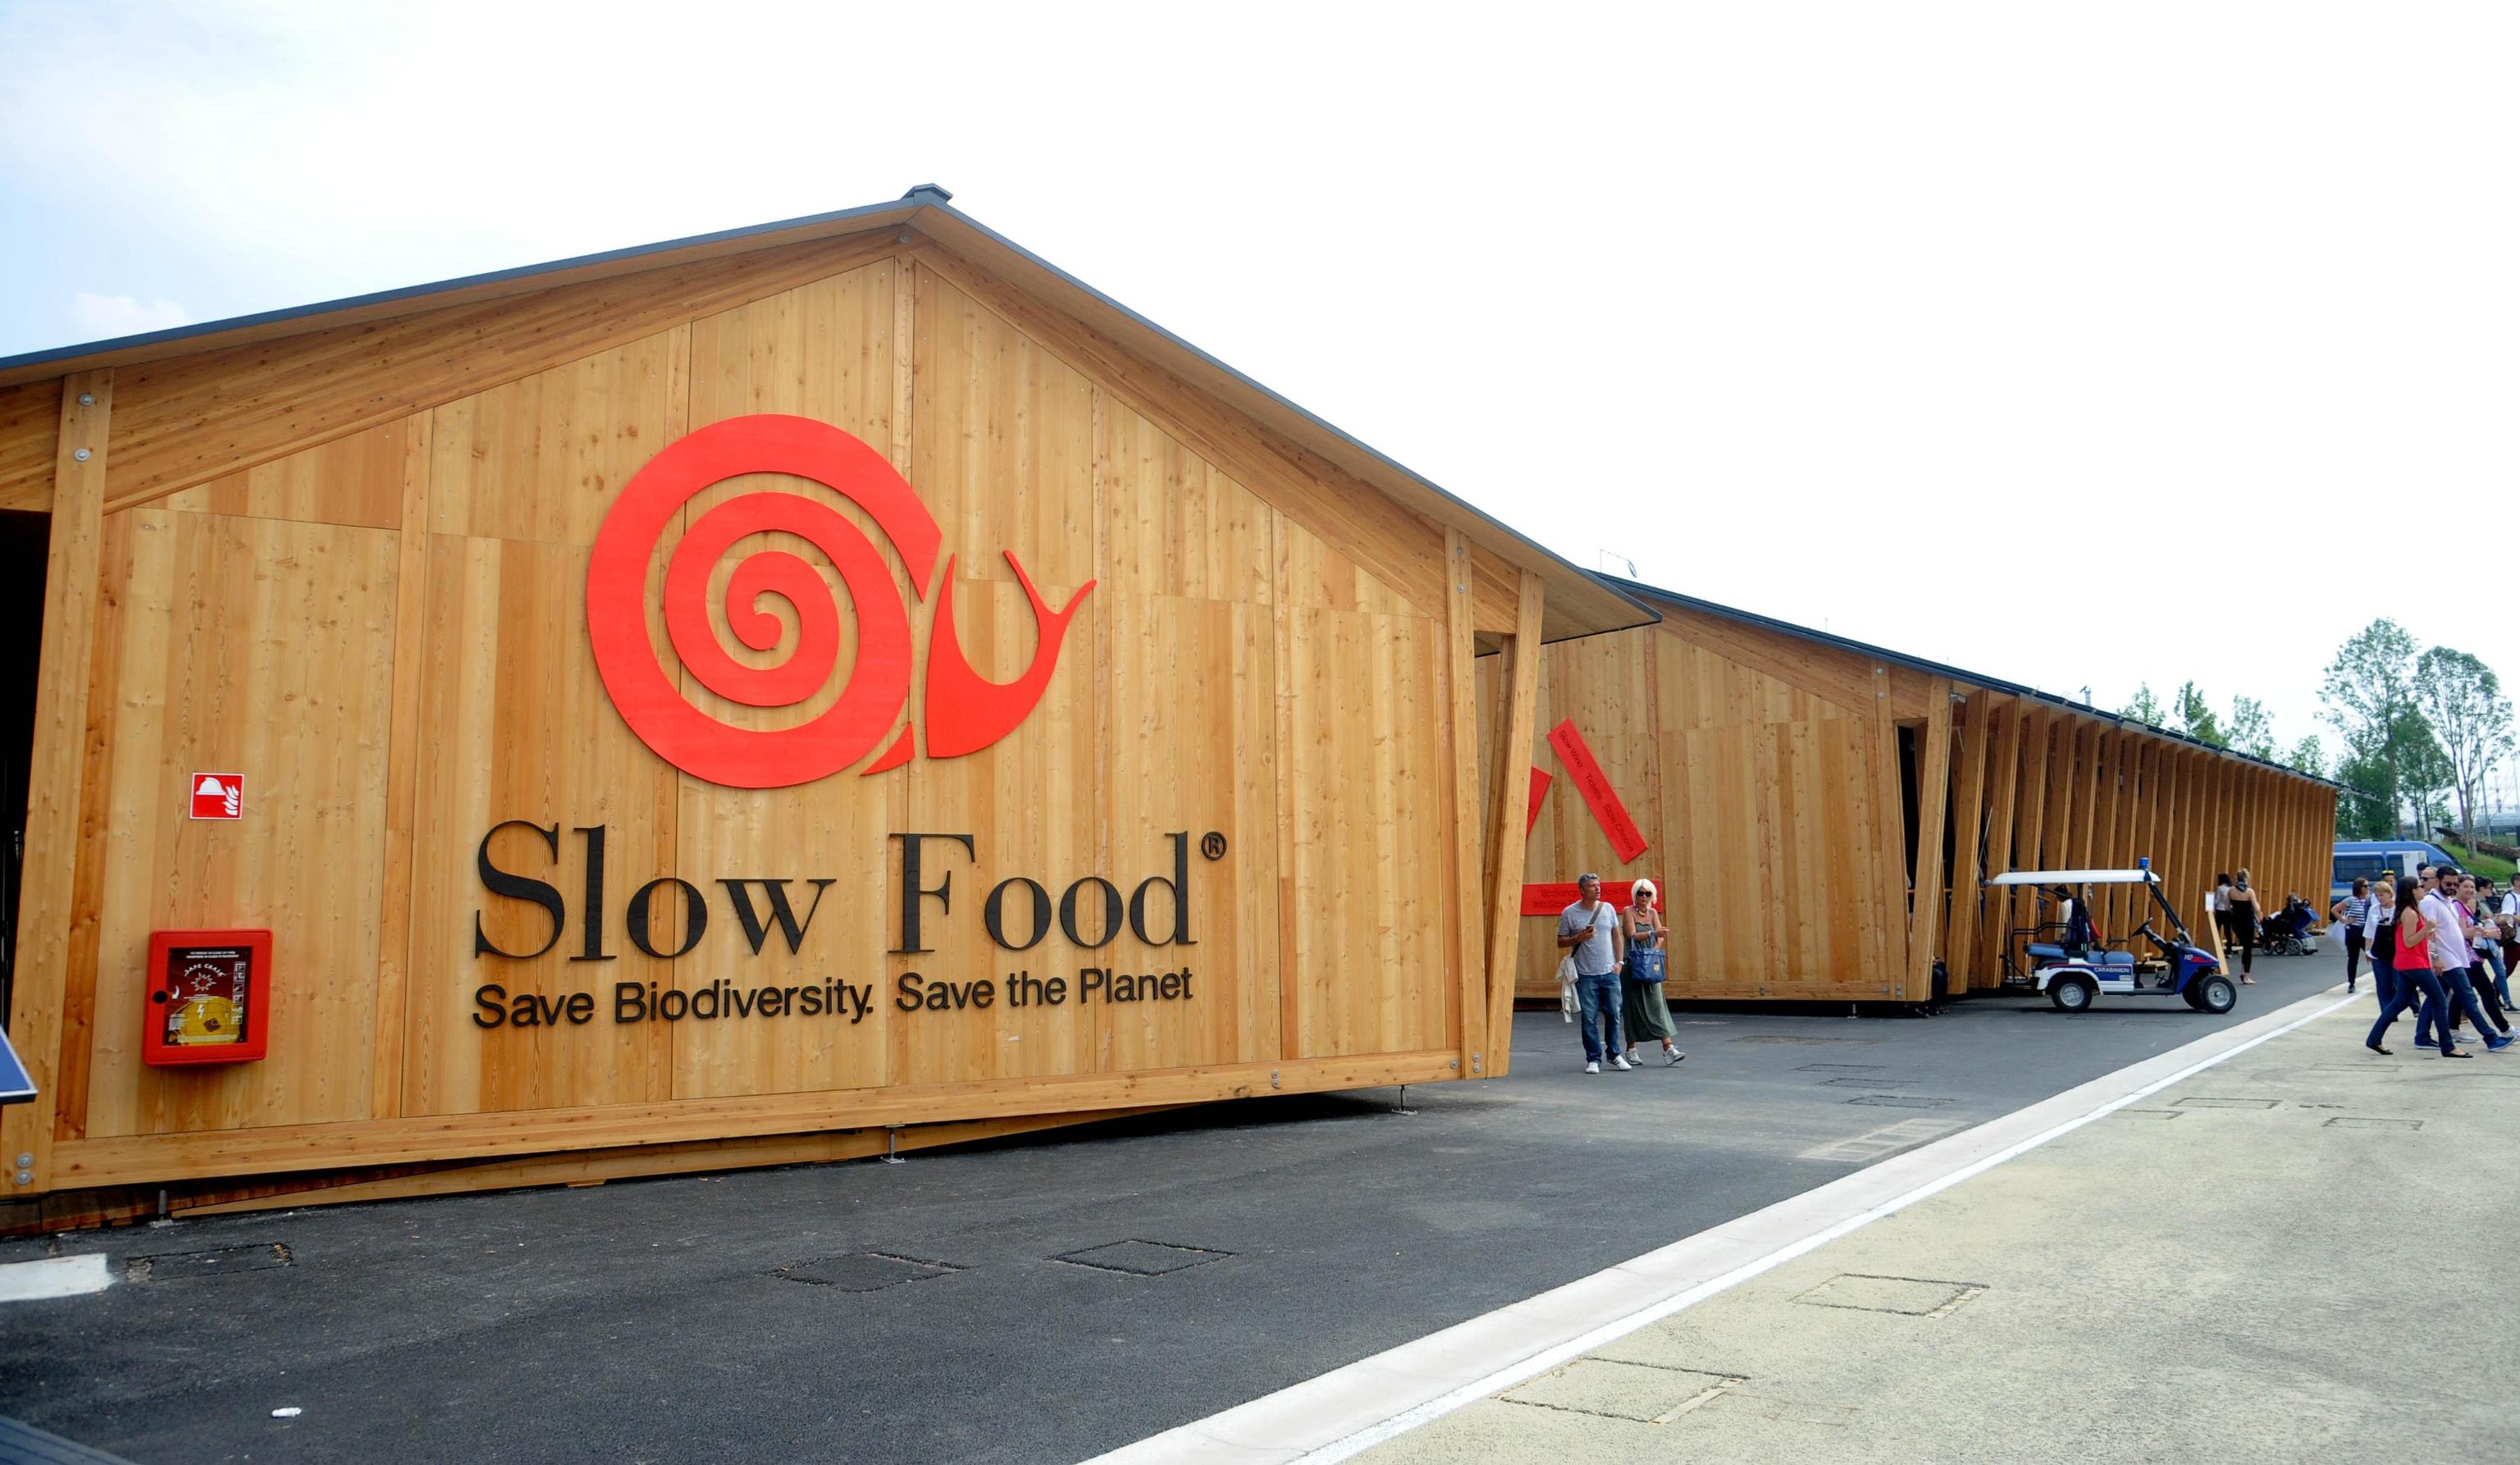 Padiglione Slow Food EXPO 2015